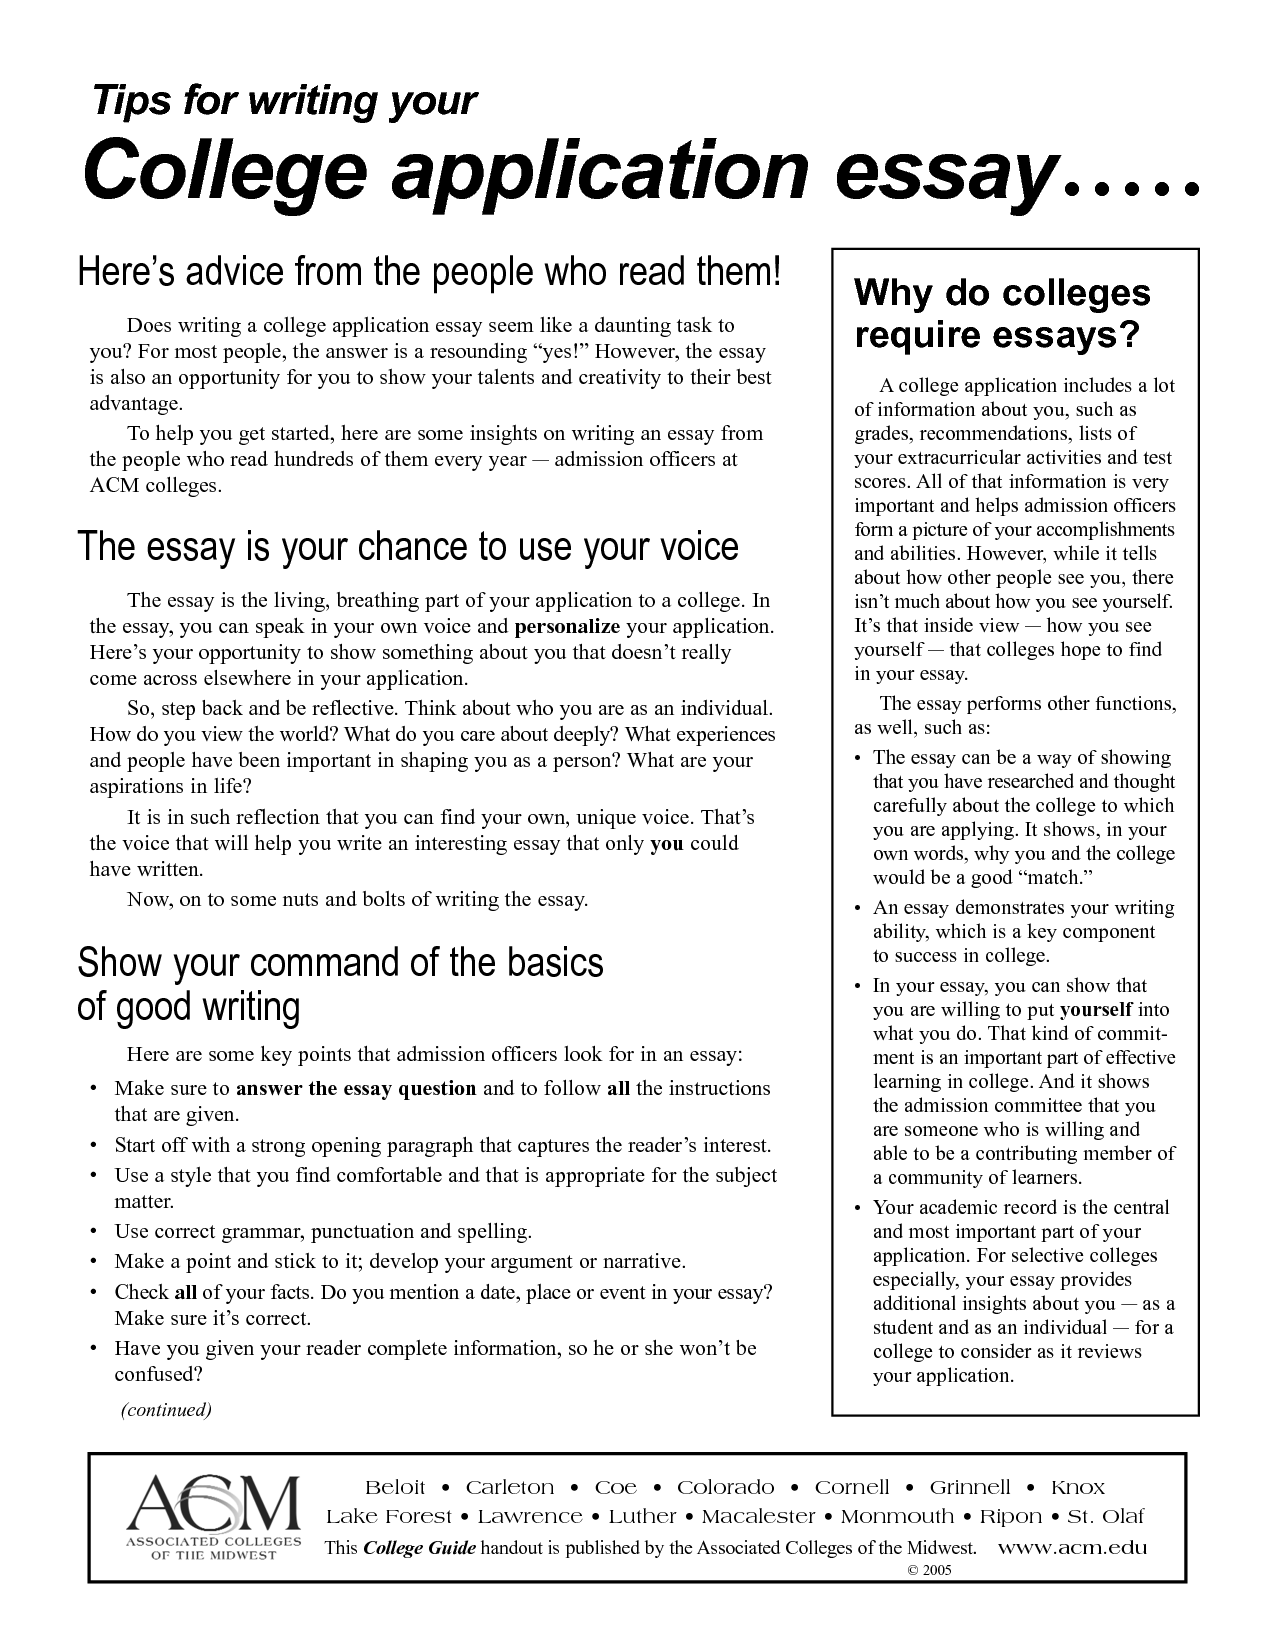 Writing a successful college application essay questions